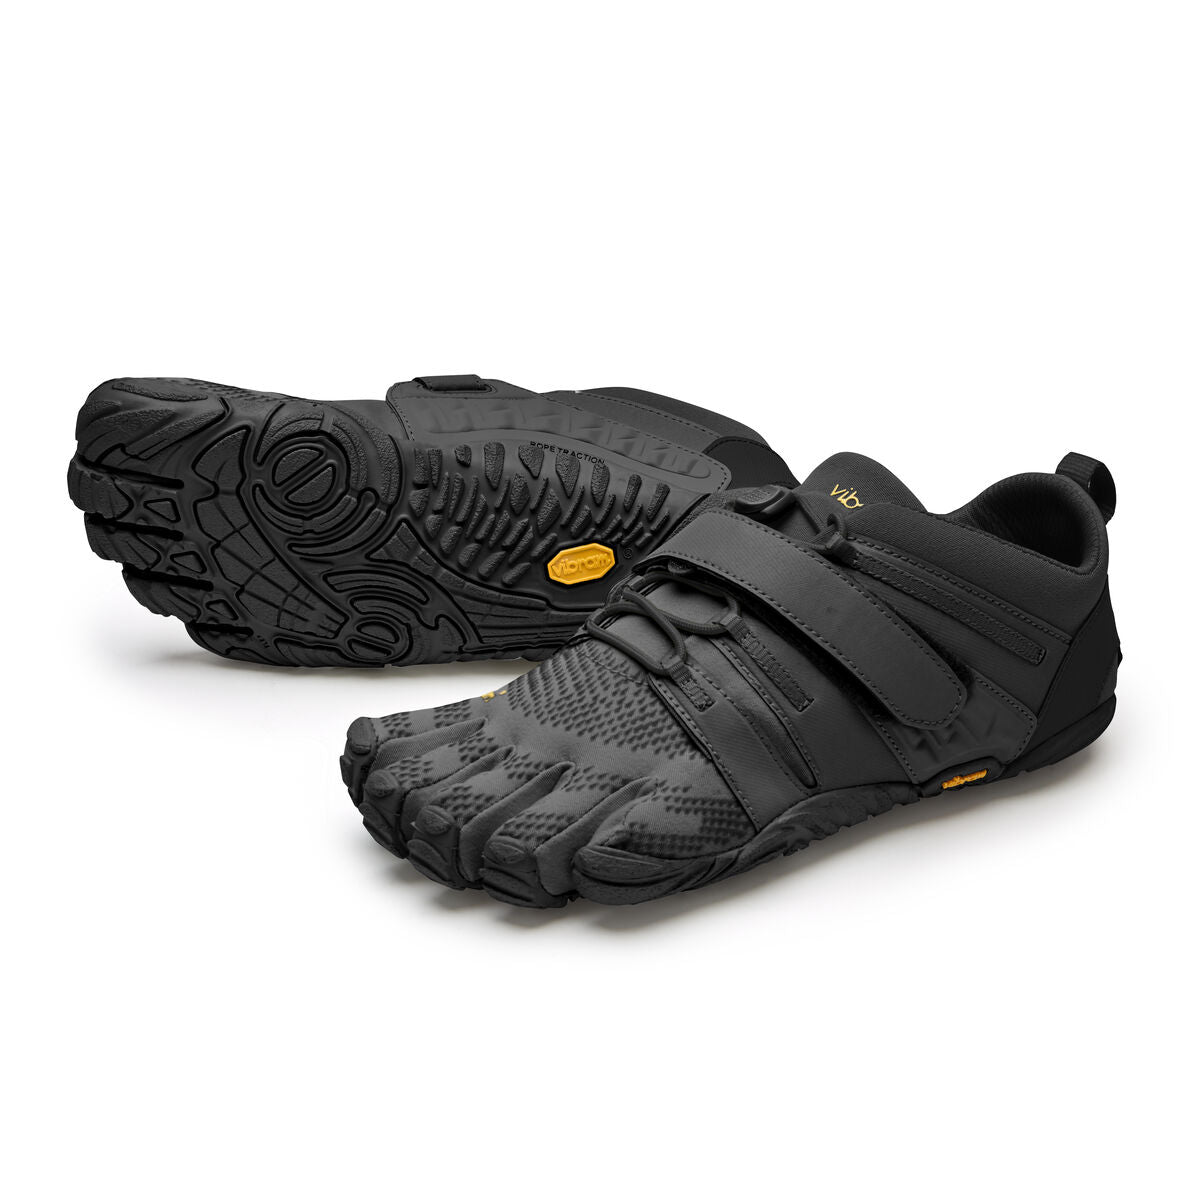 Women's Vibram Five Fingers V-Train 2.0 Fitness and Training Shoe in Black/Black from the front